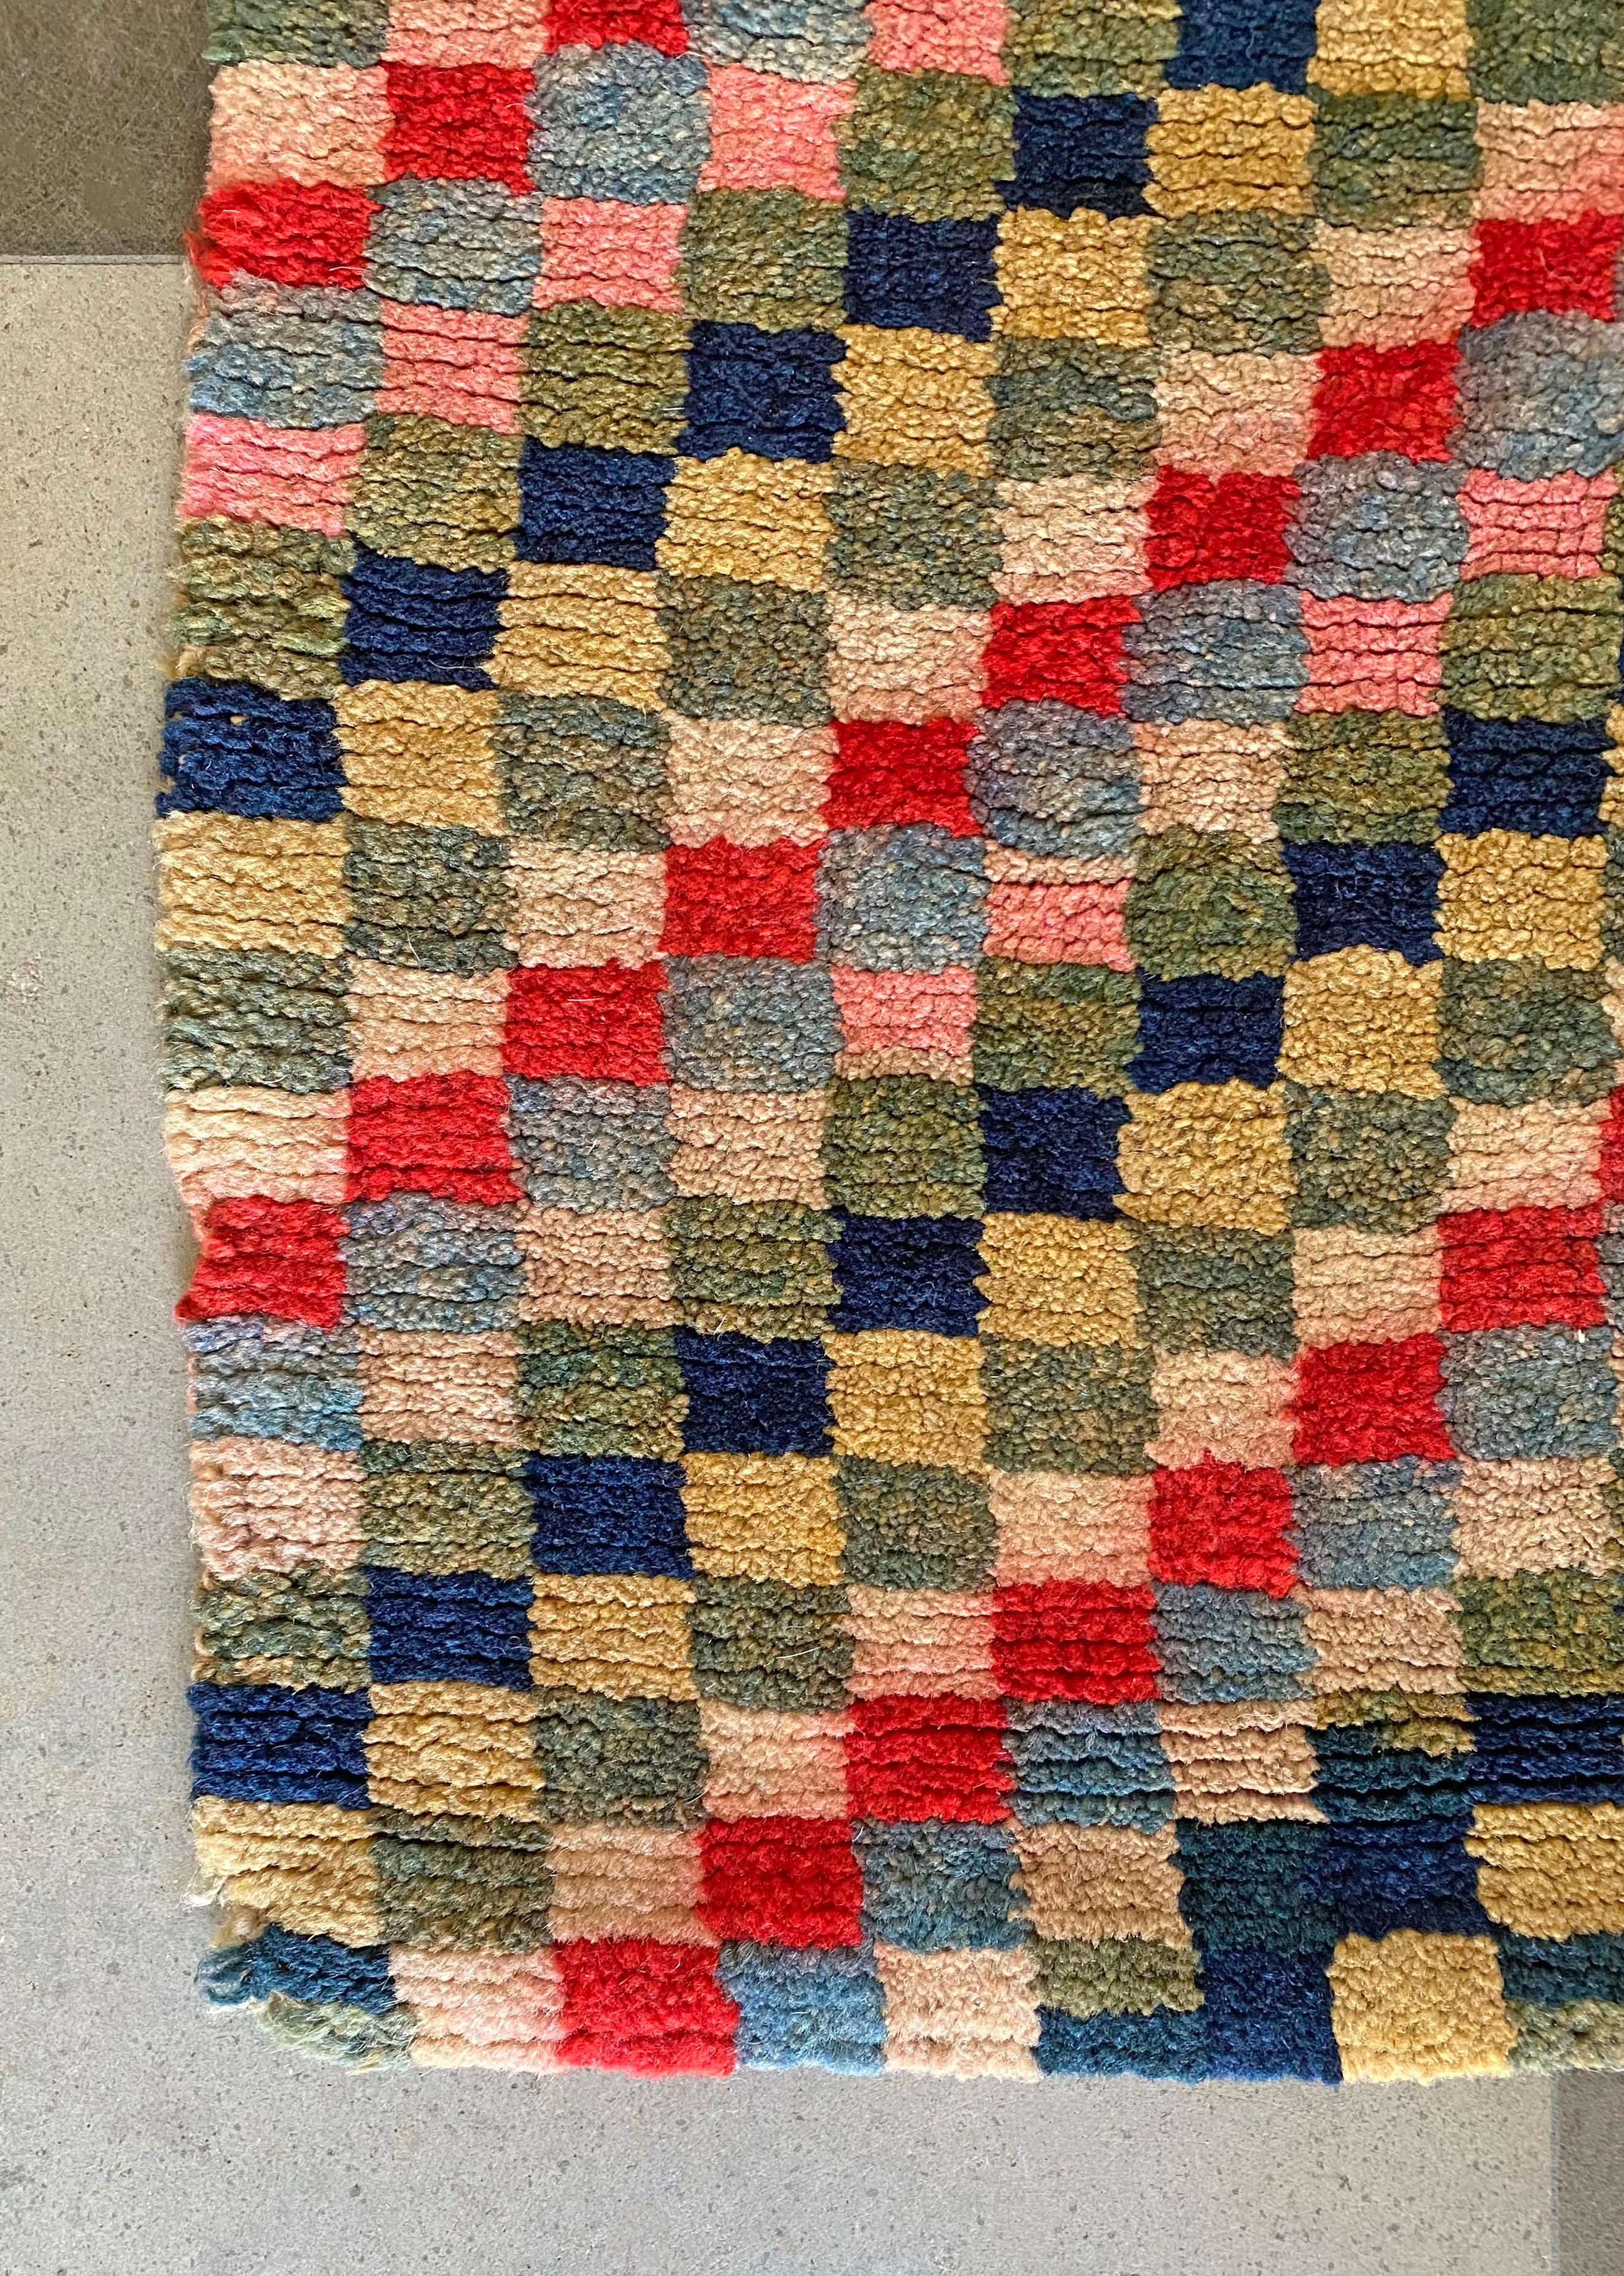 This Checkerboard meditation rug originates from Tibet and dates to the early part of the 20th century. It is hand-knotted and crafted from naturally dyed wool from the highlands of Tibet. The rug was composed using a stunning mix of coloured